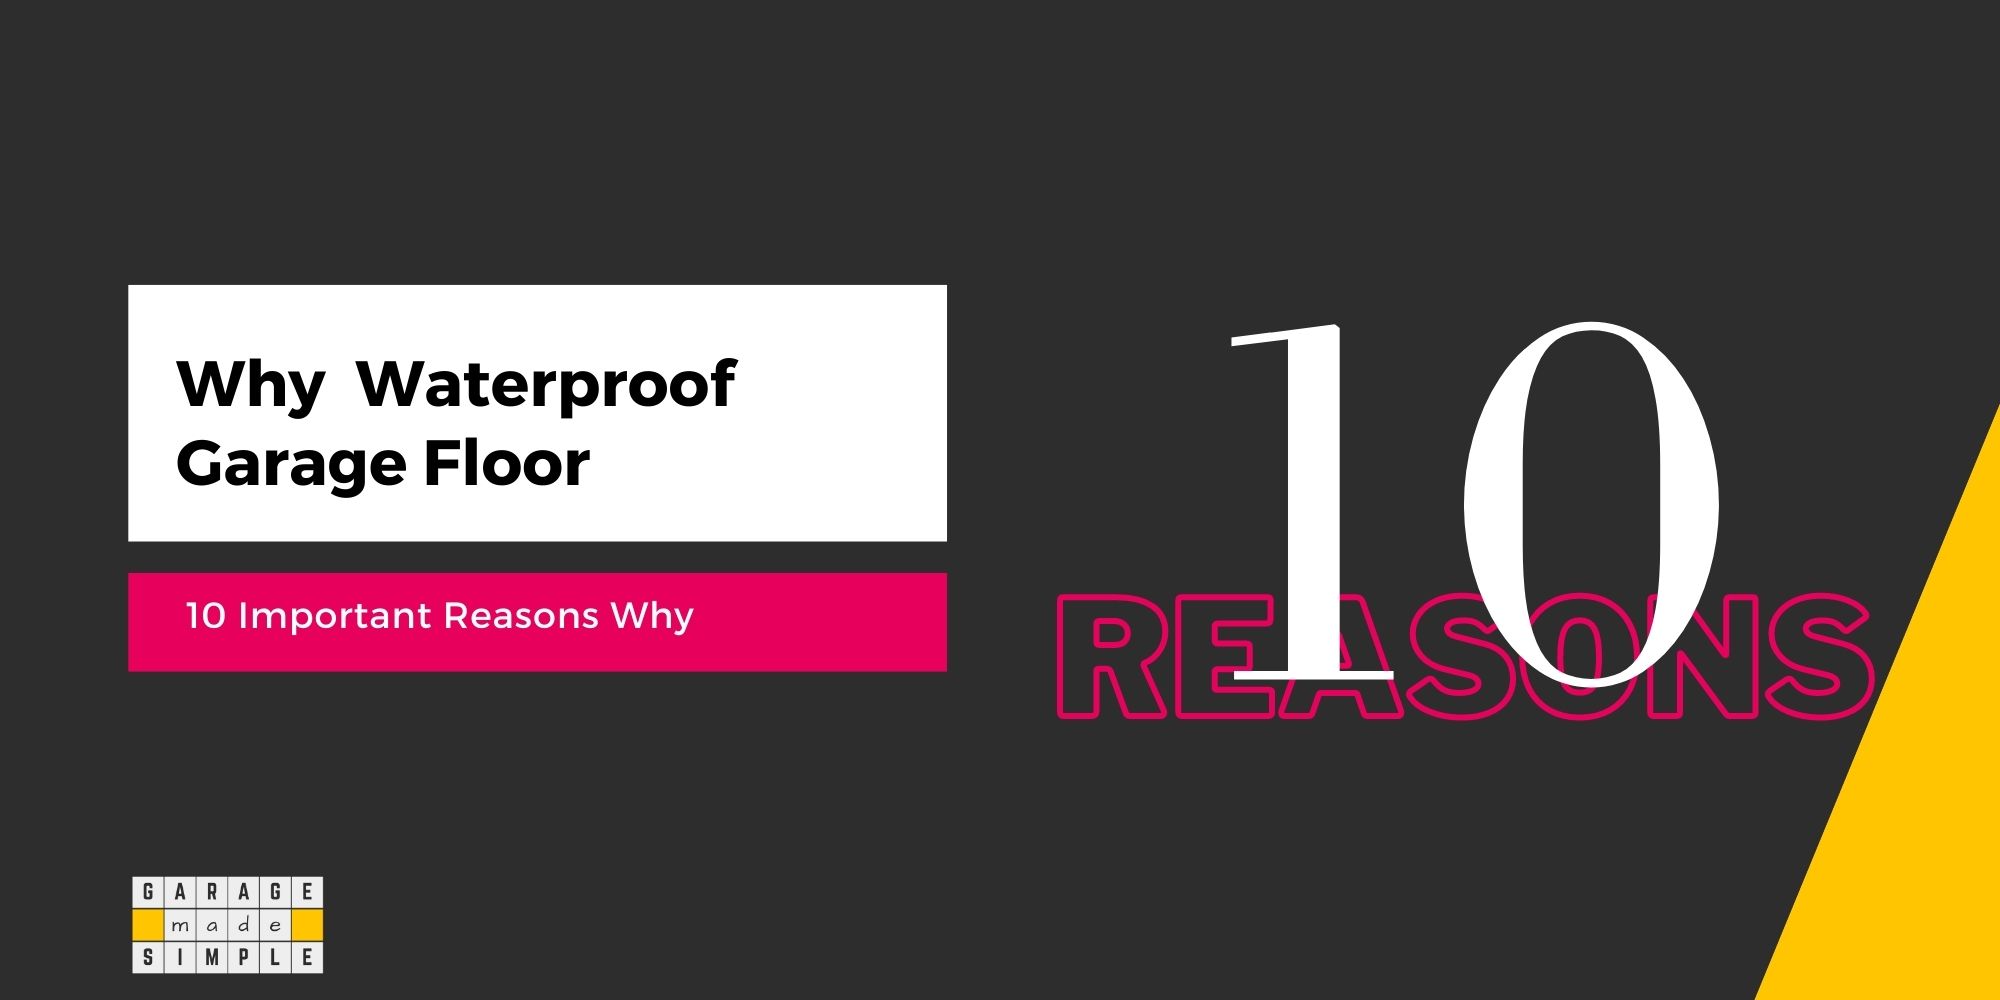 10 Important Reasons Why You Should Waterproof Your Garage Floor!